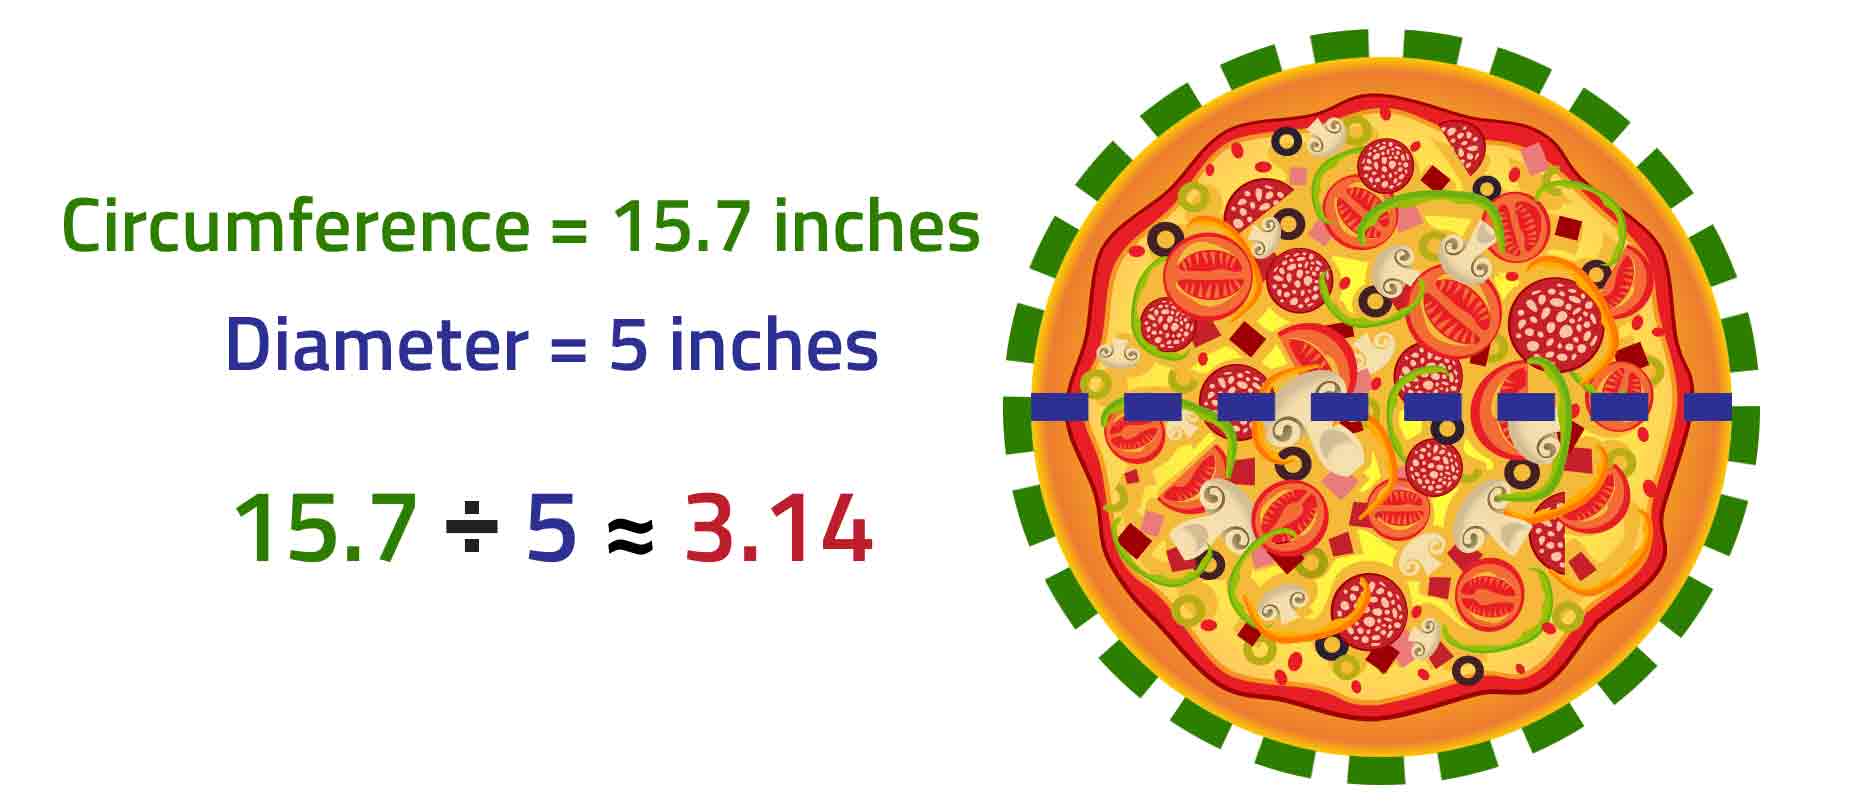 The circumference and diameter of a pizza are given along with an equation in which circumference is divided by diameter to get 3.14.